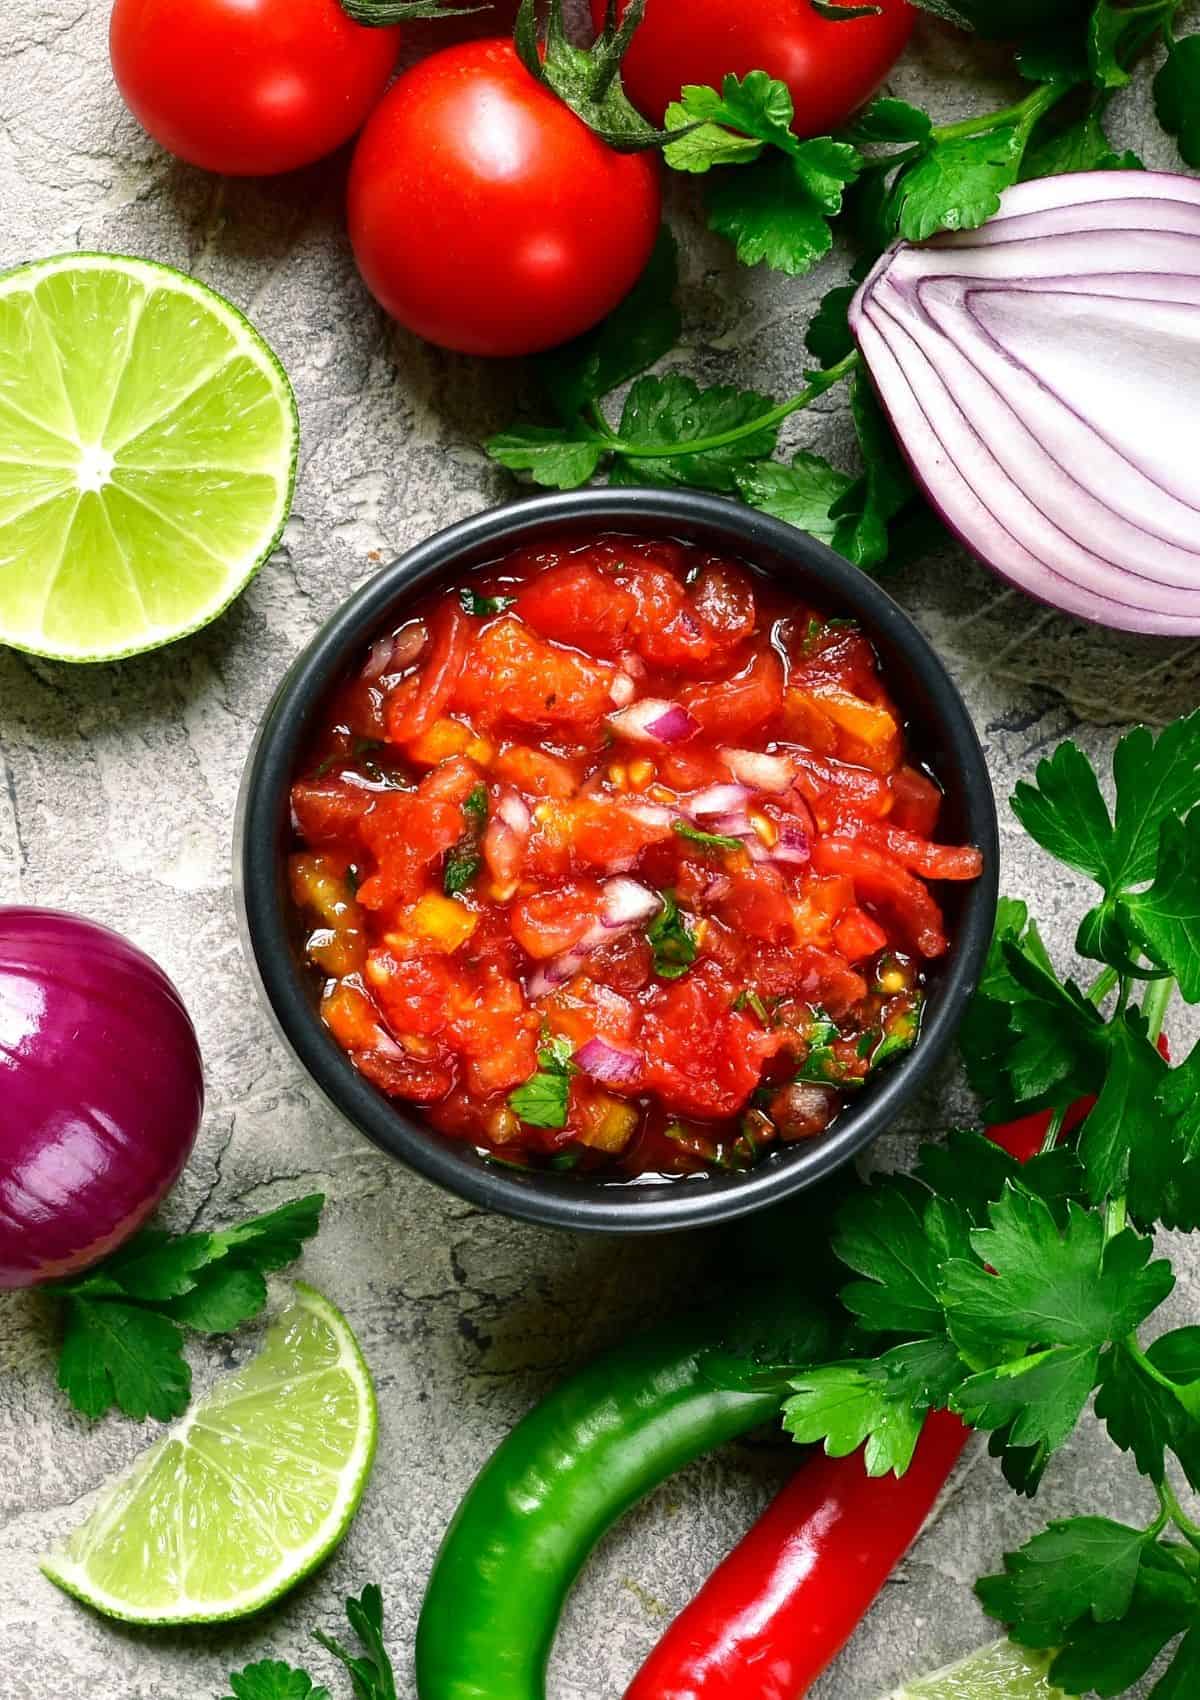 Tomato salsa in small black bowl, surrounded by ingredients such as red onion, lime, jalapeño pepper.